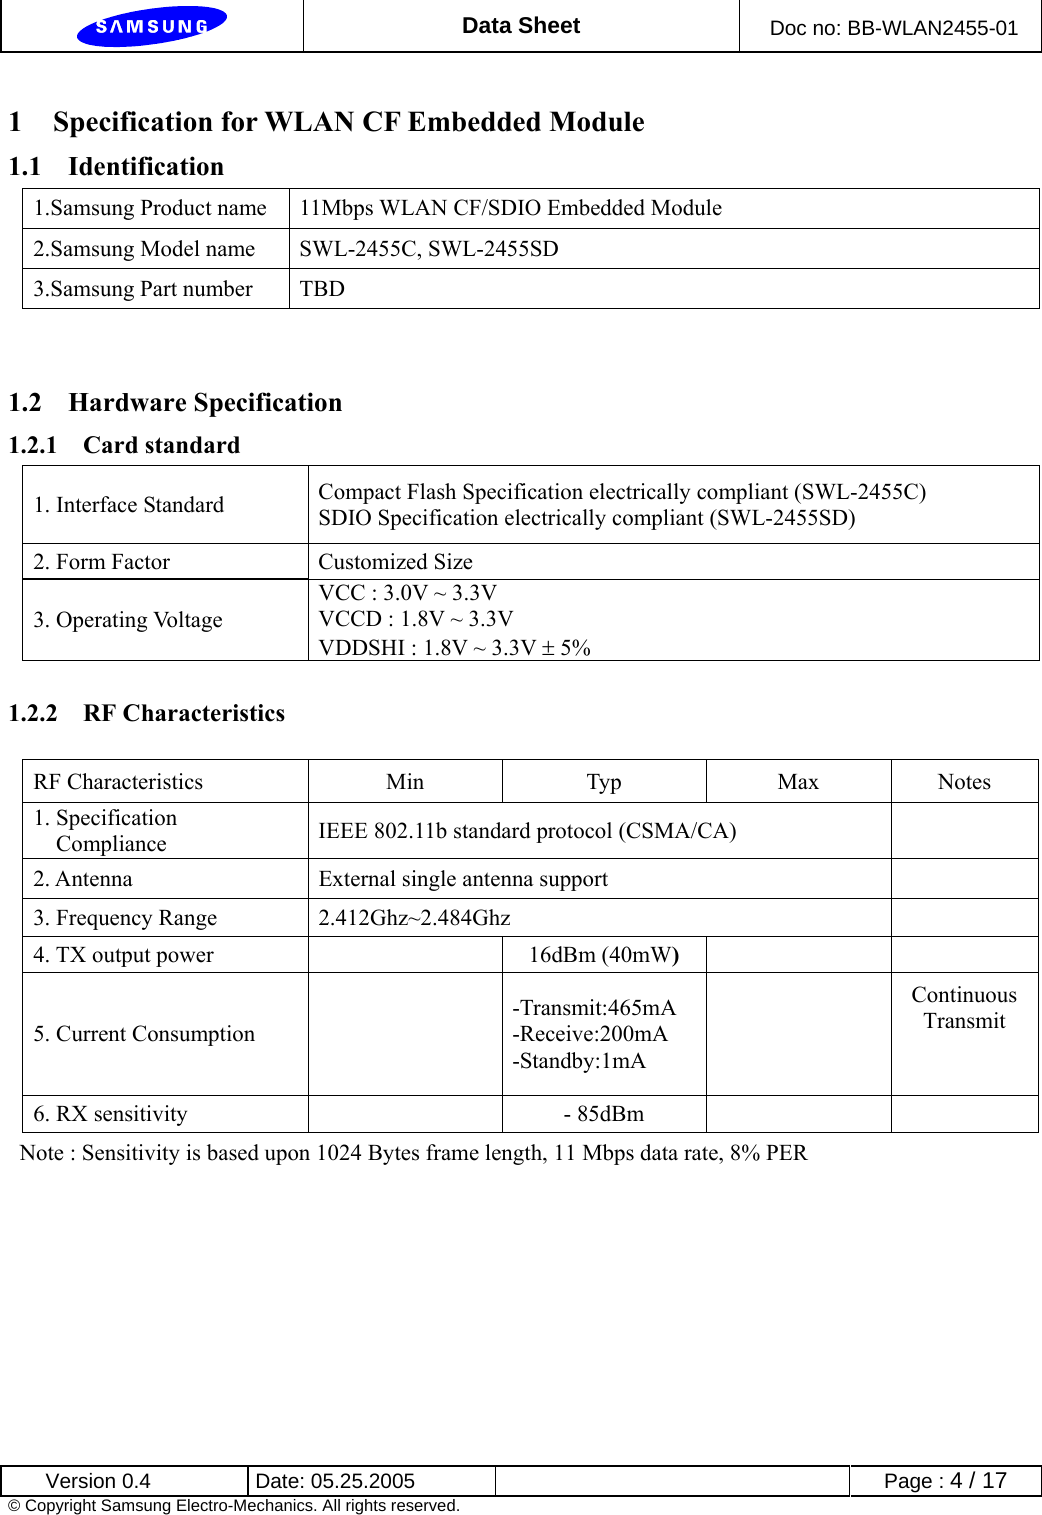  Data Sheet  Doc no: BB-WLAN2455-01  Version 0.4  Date: 05.25.2005      Page : 4 / 17 © Copyright Samsung Electro-Mechanics. All rights reserved. 1 Specification for WLAN CF Embedded Module 1.1 Identification 1.Samsung Product name  11Mbps WLAN CF/SDIO Embedded Module 2.Samsung Model name  SWL-2455C, SWL-2455SD 3.Samsung Part number  TBD   1.2 Hardware Specification 1.2.1 Card standard 1. Interface Standard  Compact Flash Specification electrically compliant (SWL-2455C) SDIO Specification electrically compliant (SWL-2455SD) 2. Form Factor  Customized Size 3. Operating Voltage VCC : 3.0V ~ 3.3V VCCD : 1.8V ~ 3.3V   VDDSHI : 1.8V ~ 3.3V ± 5%  1.2.2 RF Characteristics      RF Characteristics  Min  Typ  Max  Notes 1. Specification Compliance  IEEE 802.11b standard protocol (CSMA/CA)   2. Antenna External single antenna support   3. Frequency Range 2.412Ghz~2.484Ghz  4. TX output power      16dBm (40mW)    5. Current Consumption   -Transmit:465mA -Receive:200mA -Standby:1mA  Continuous Transmit   6. RX sensitivity   - 85dBm       Note : Sensitivity is based upon 1024 Bytes frame length, 11 Mbps data rate, 8% PER    